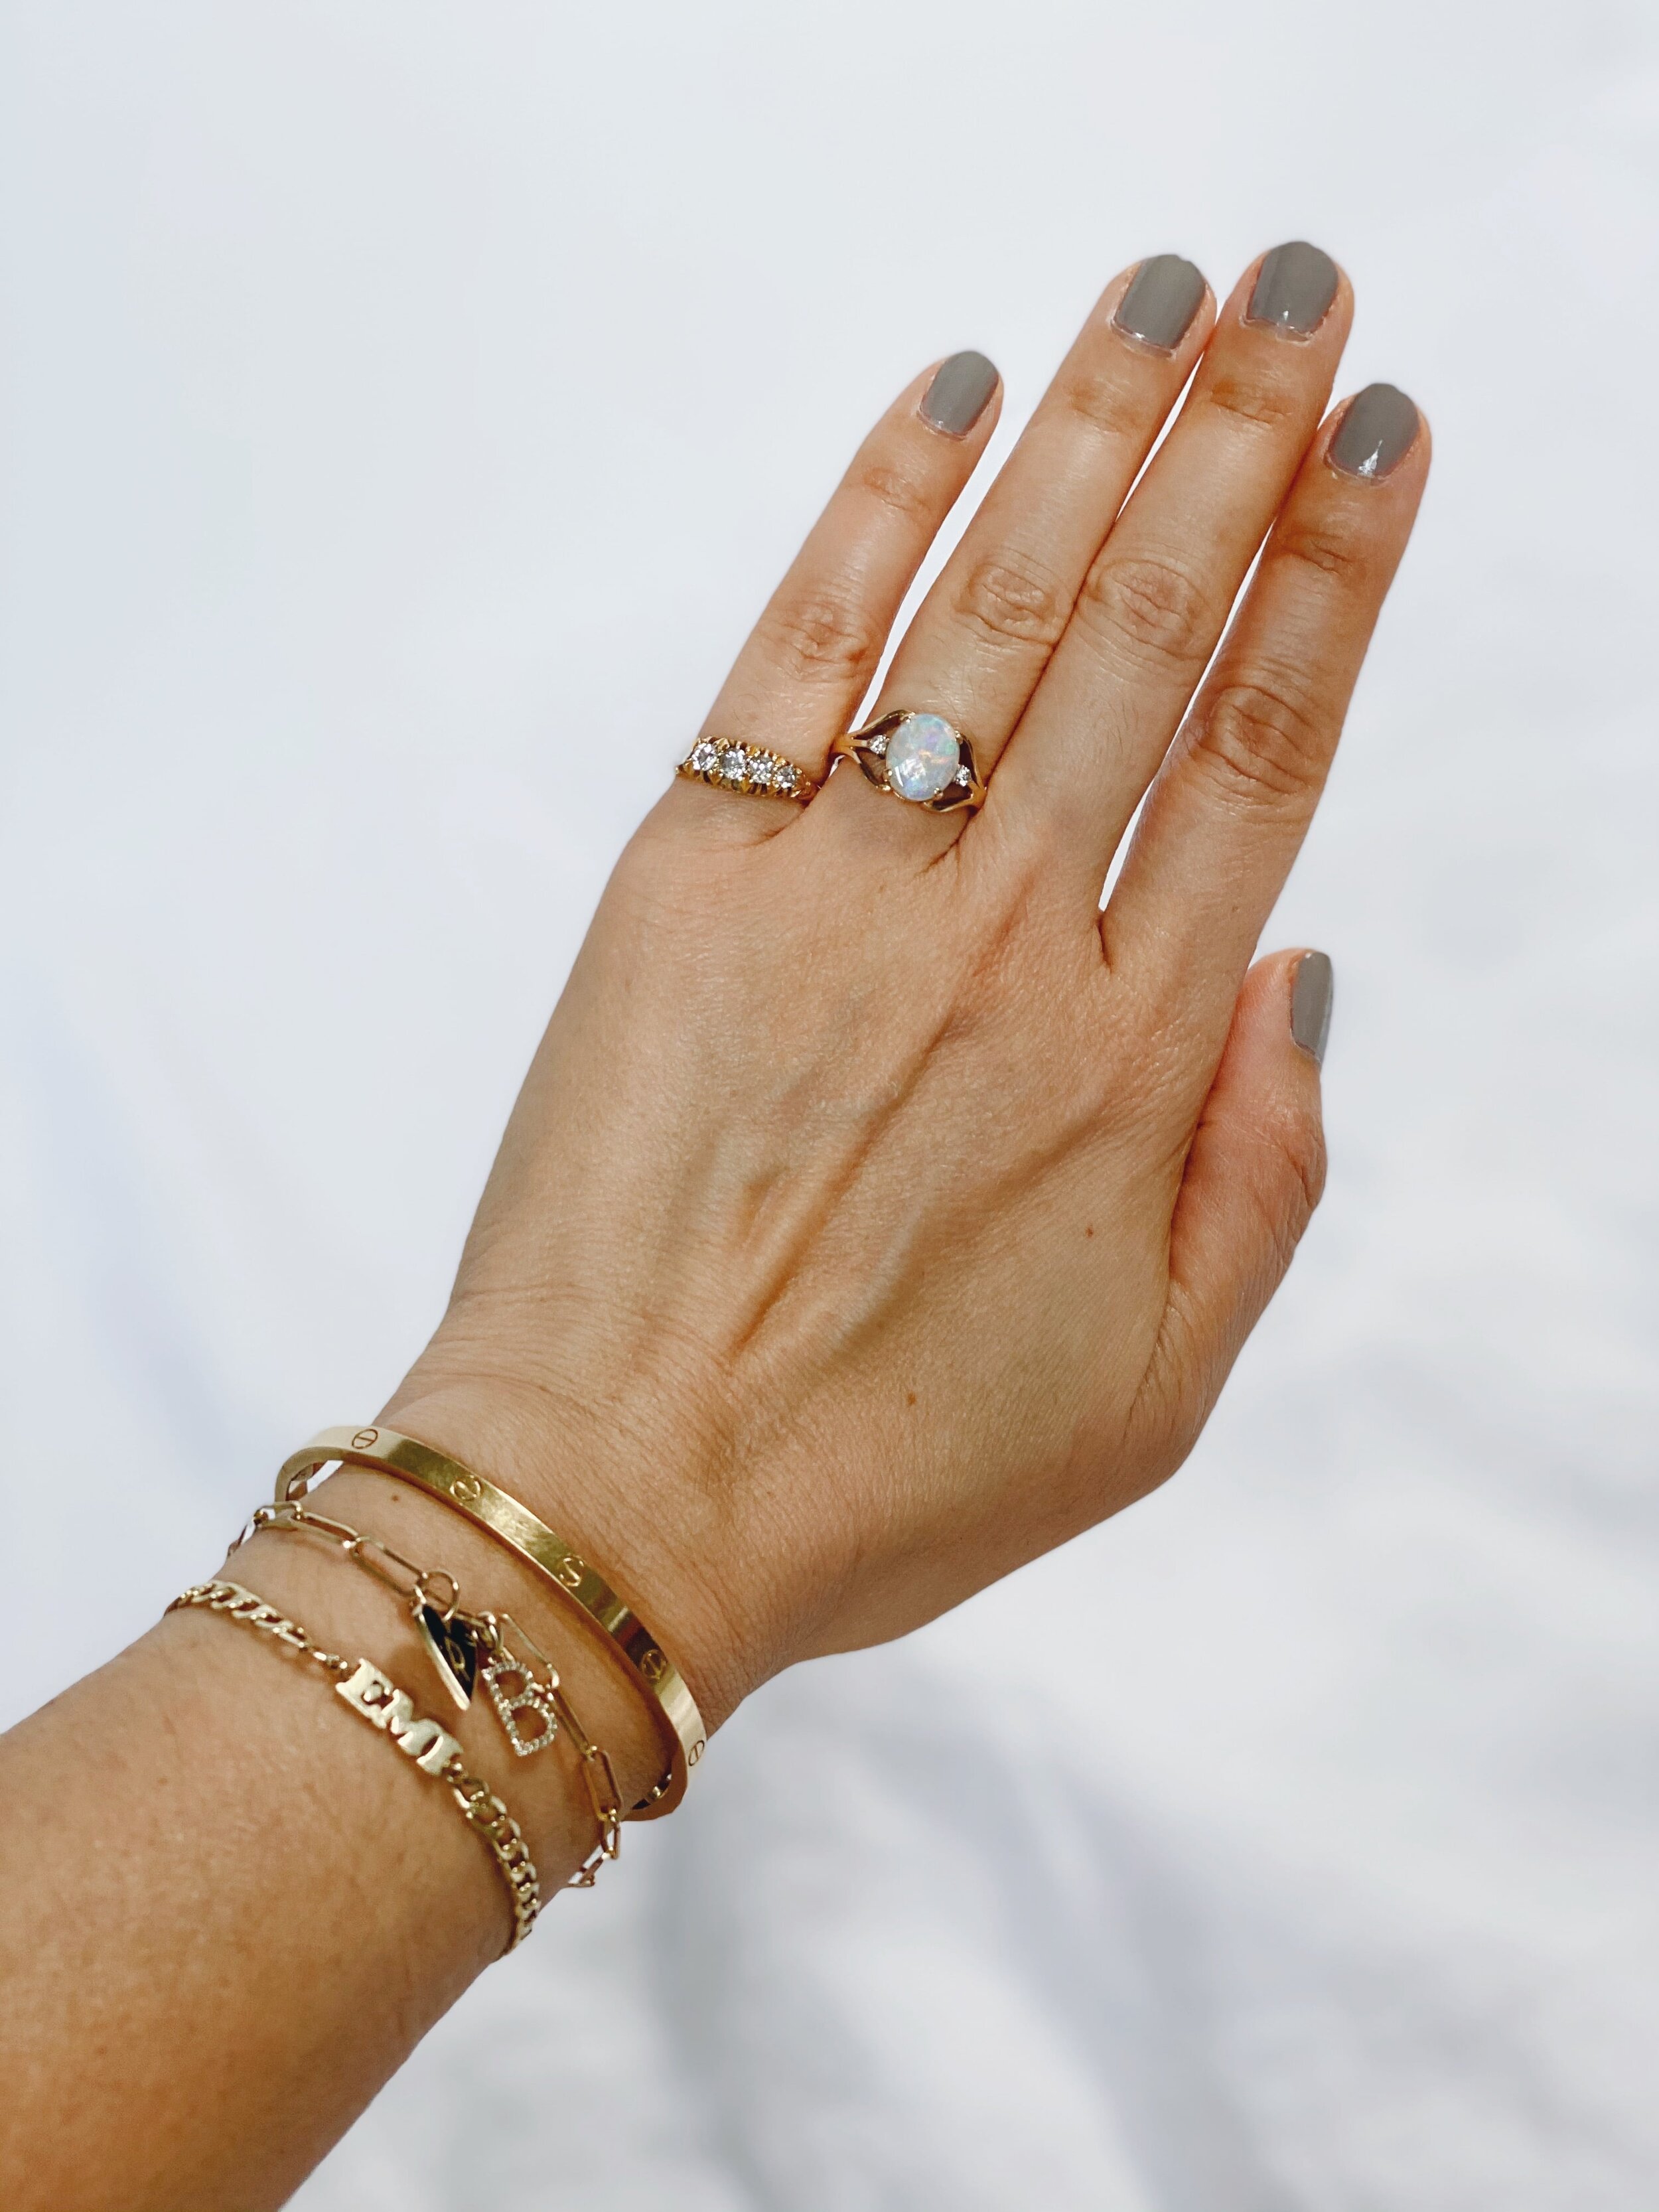 Love Bracelet Style Review - Worth it and Practical? - Gin & Pretzels